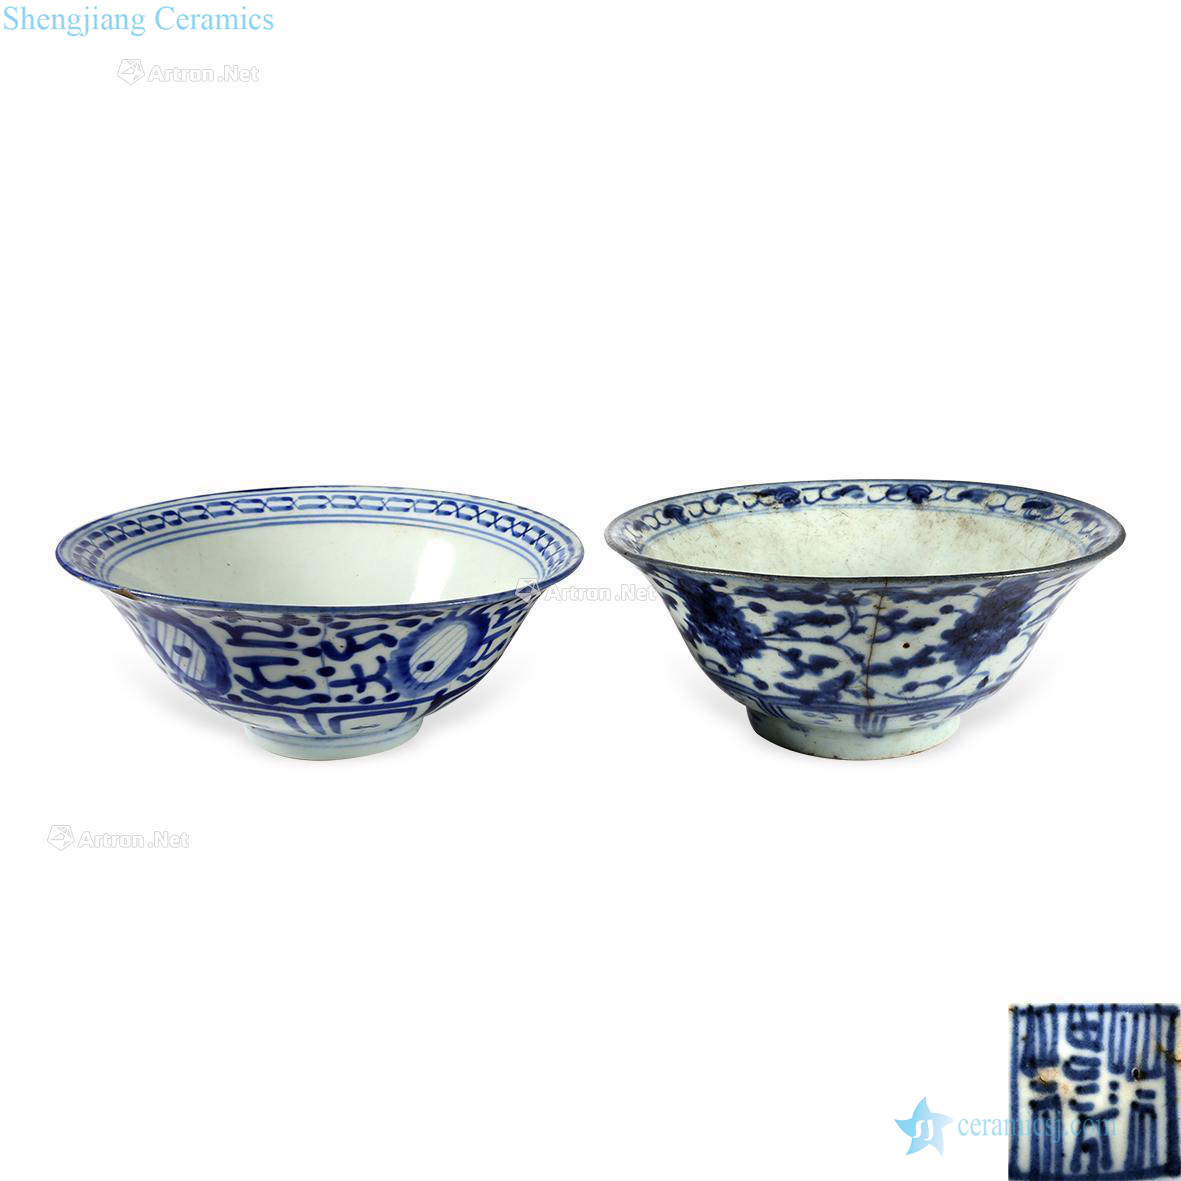 In the qing dynasty Blue and white flower green-splashed bowls